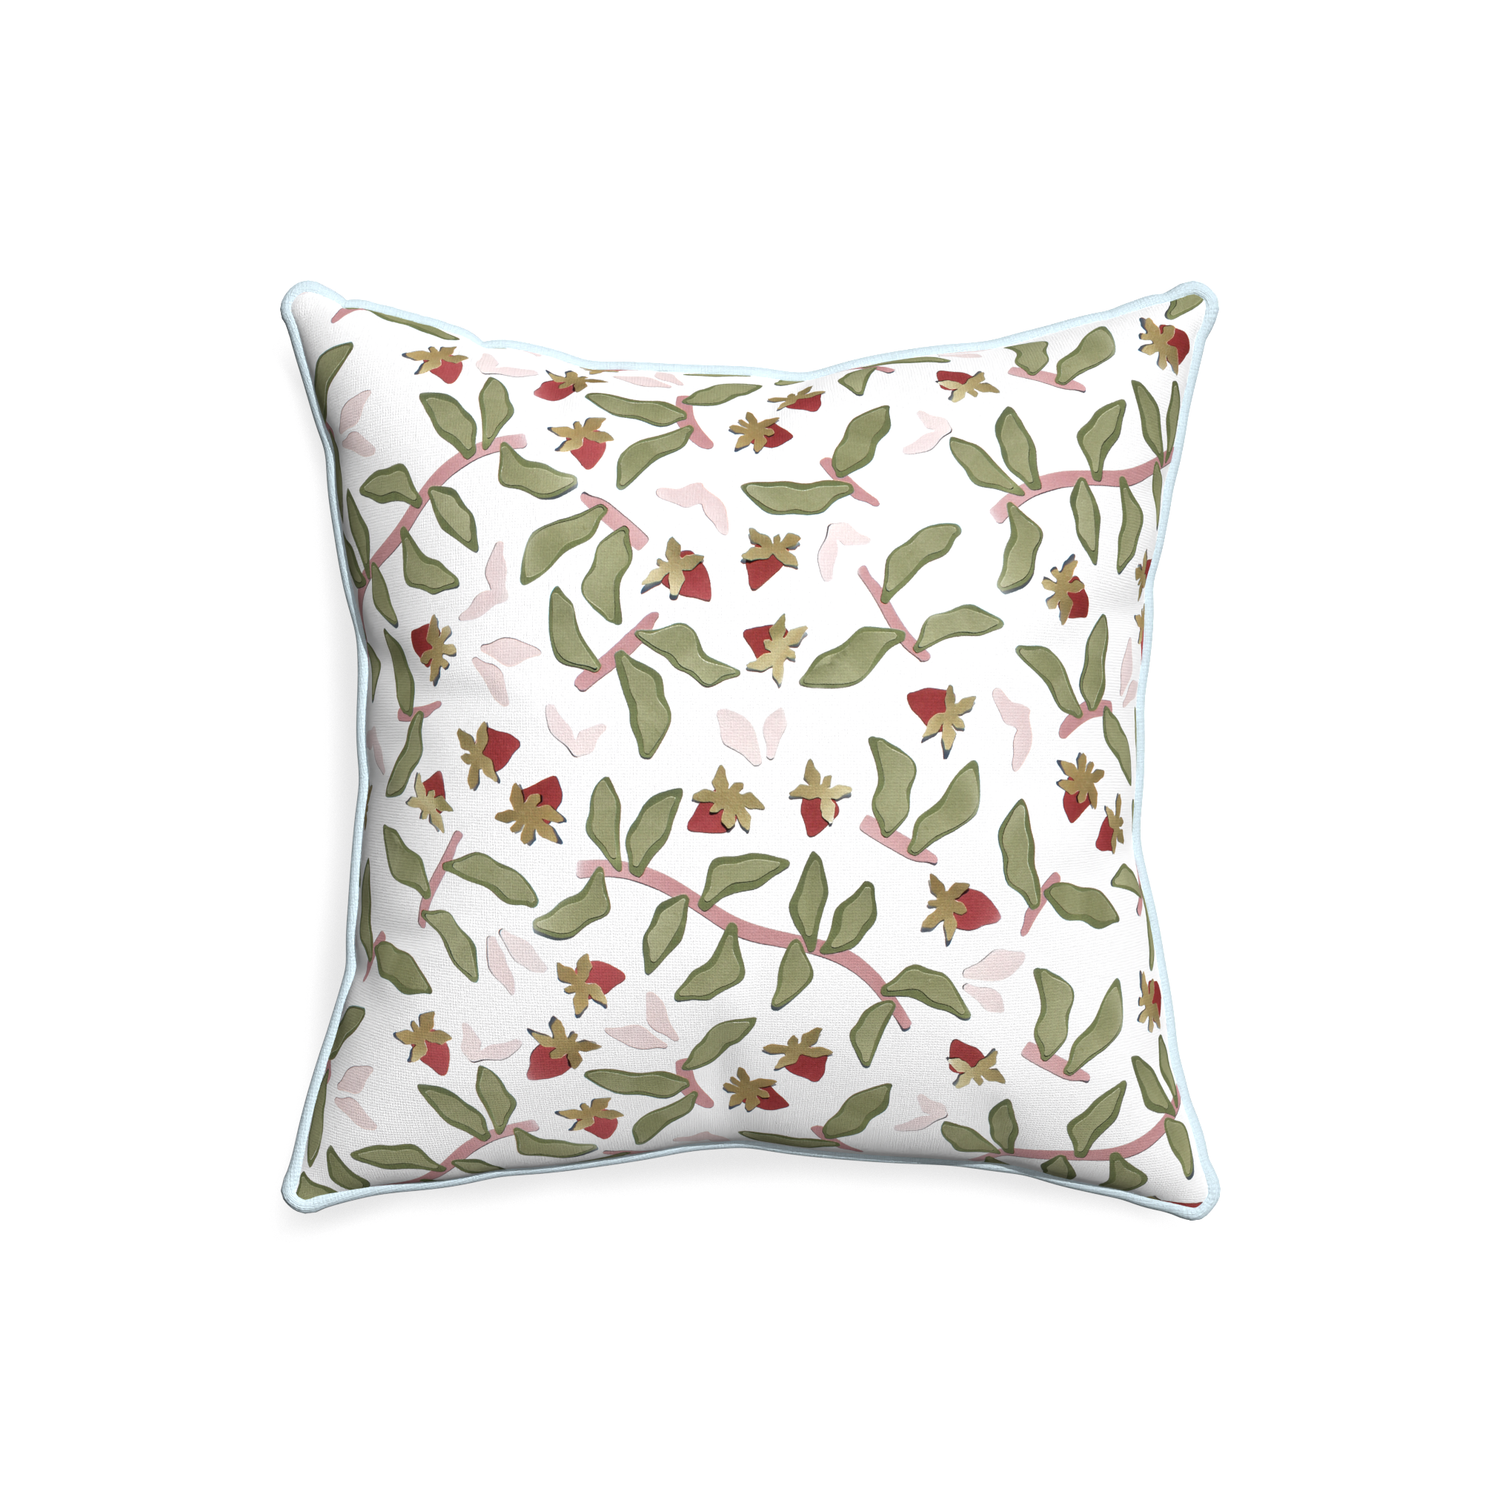 20-square nellie custom strawberry & botanicalpillow with powder piping on white background